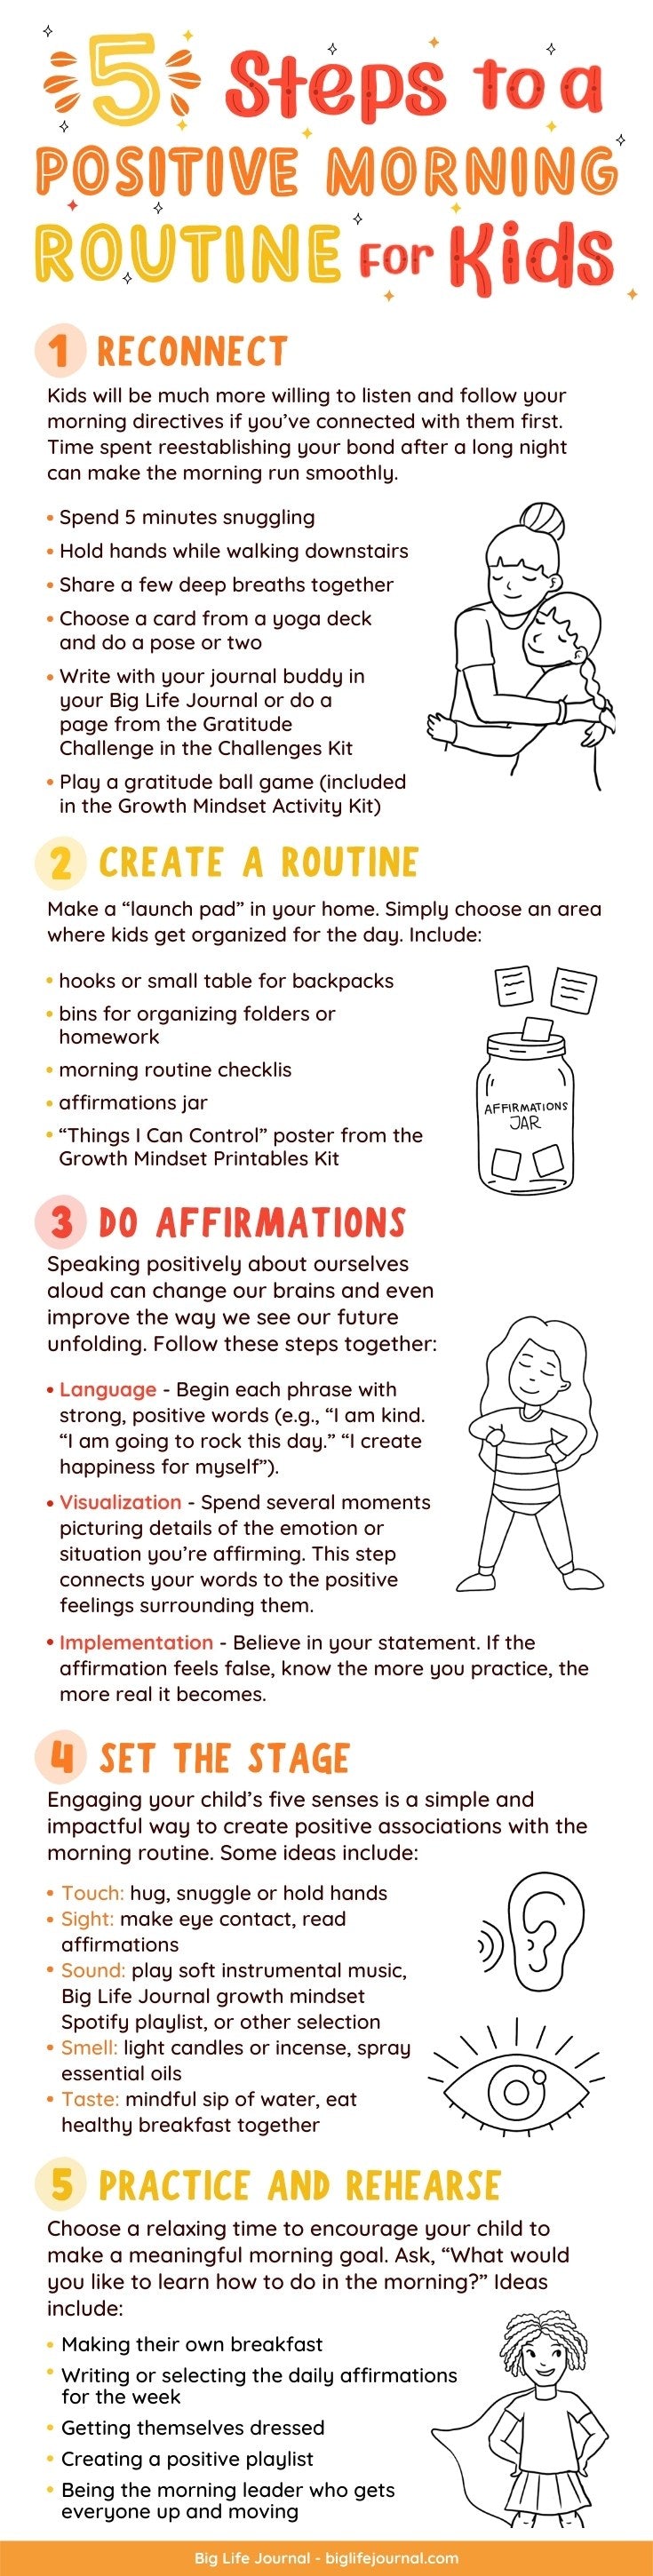 5 Steps to a Positive Morning Routine for Kids